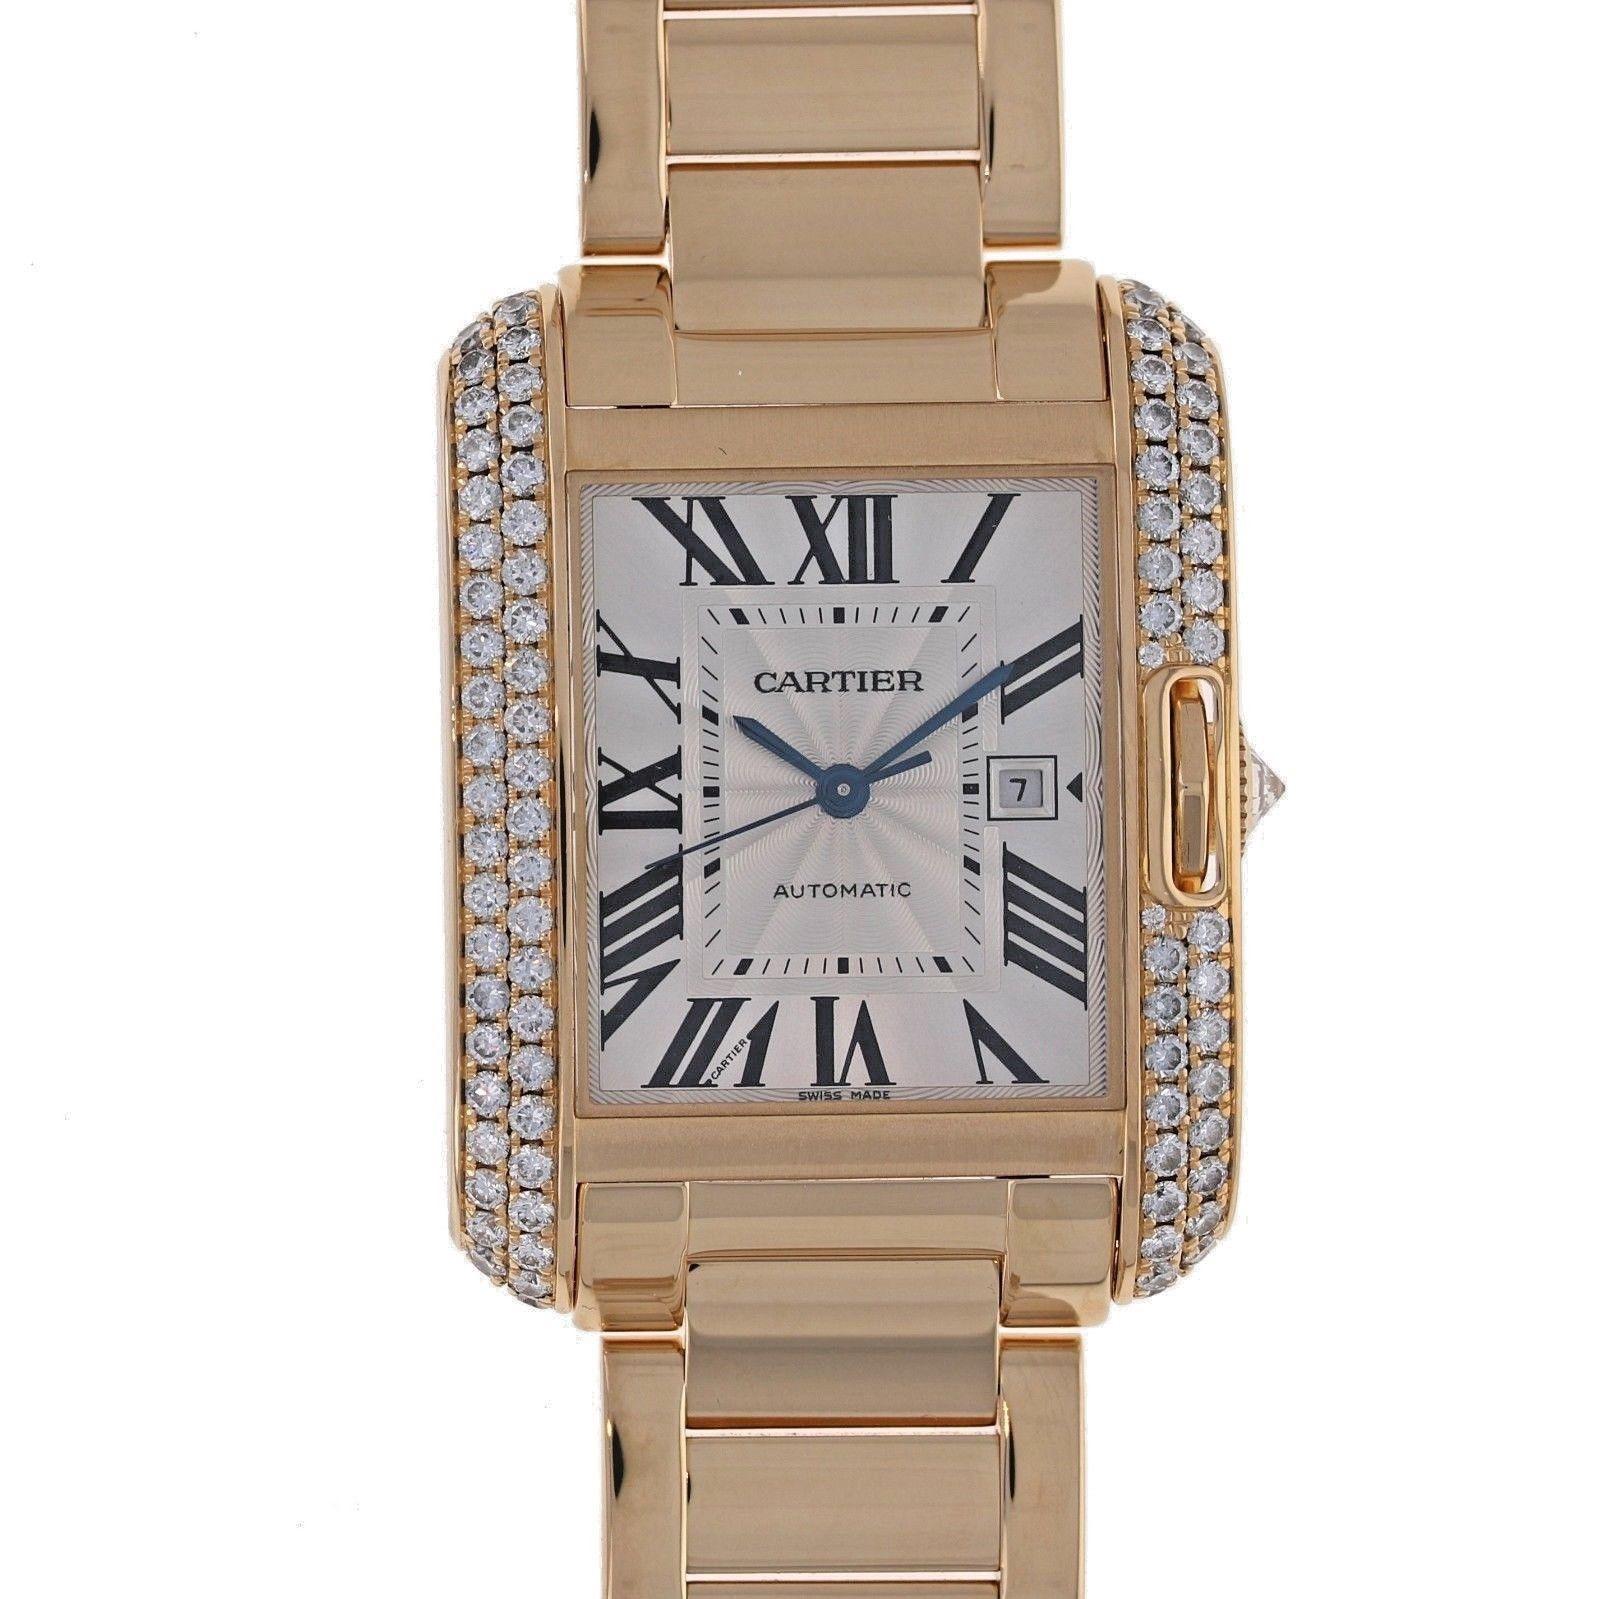 Brand Name  Cartier 
Style Number  WT100006 
Series  Tank Anglaise 
Gender  Lady's 
Case Material  18K Yellow Gold w/ Diamonds 
Dial Color  Silvered and lacquered flinque w/ black Roman numerals 
Movement  Automatic 
Functions  Hours, Minutes,